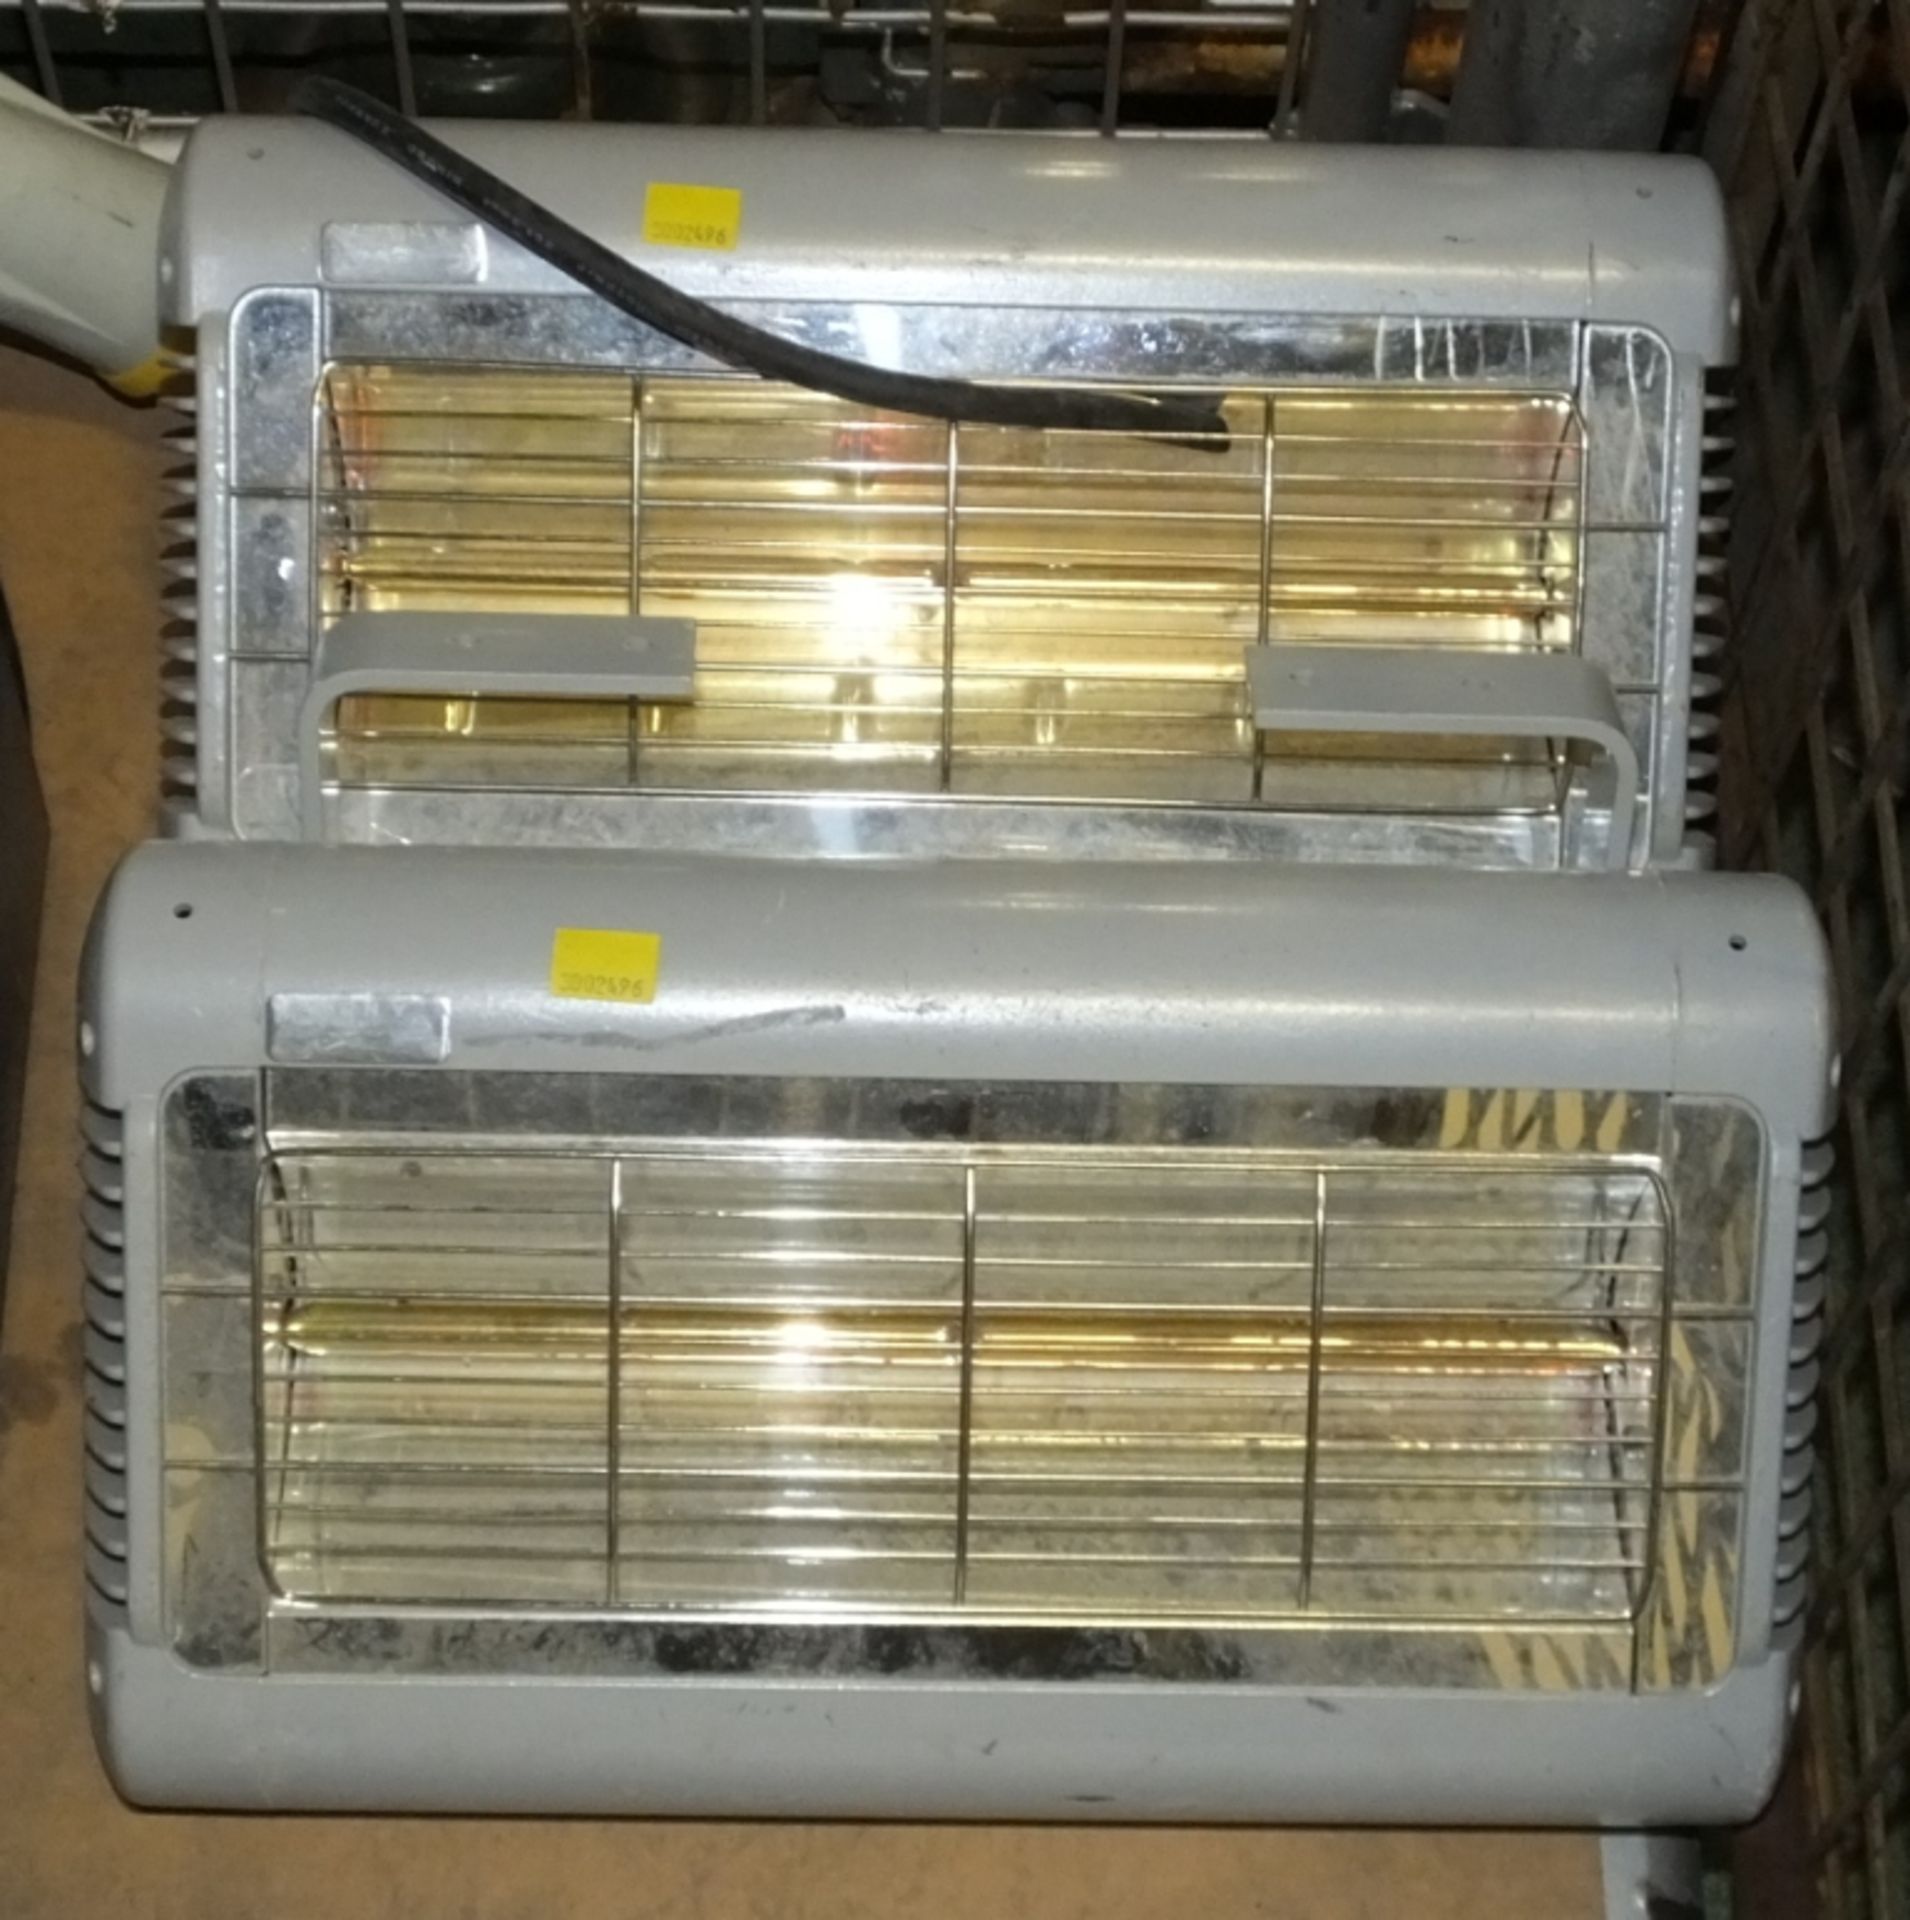 Electric Equipment - Heaters, Lights - Image 3 of 5